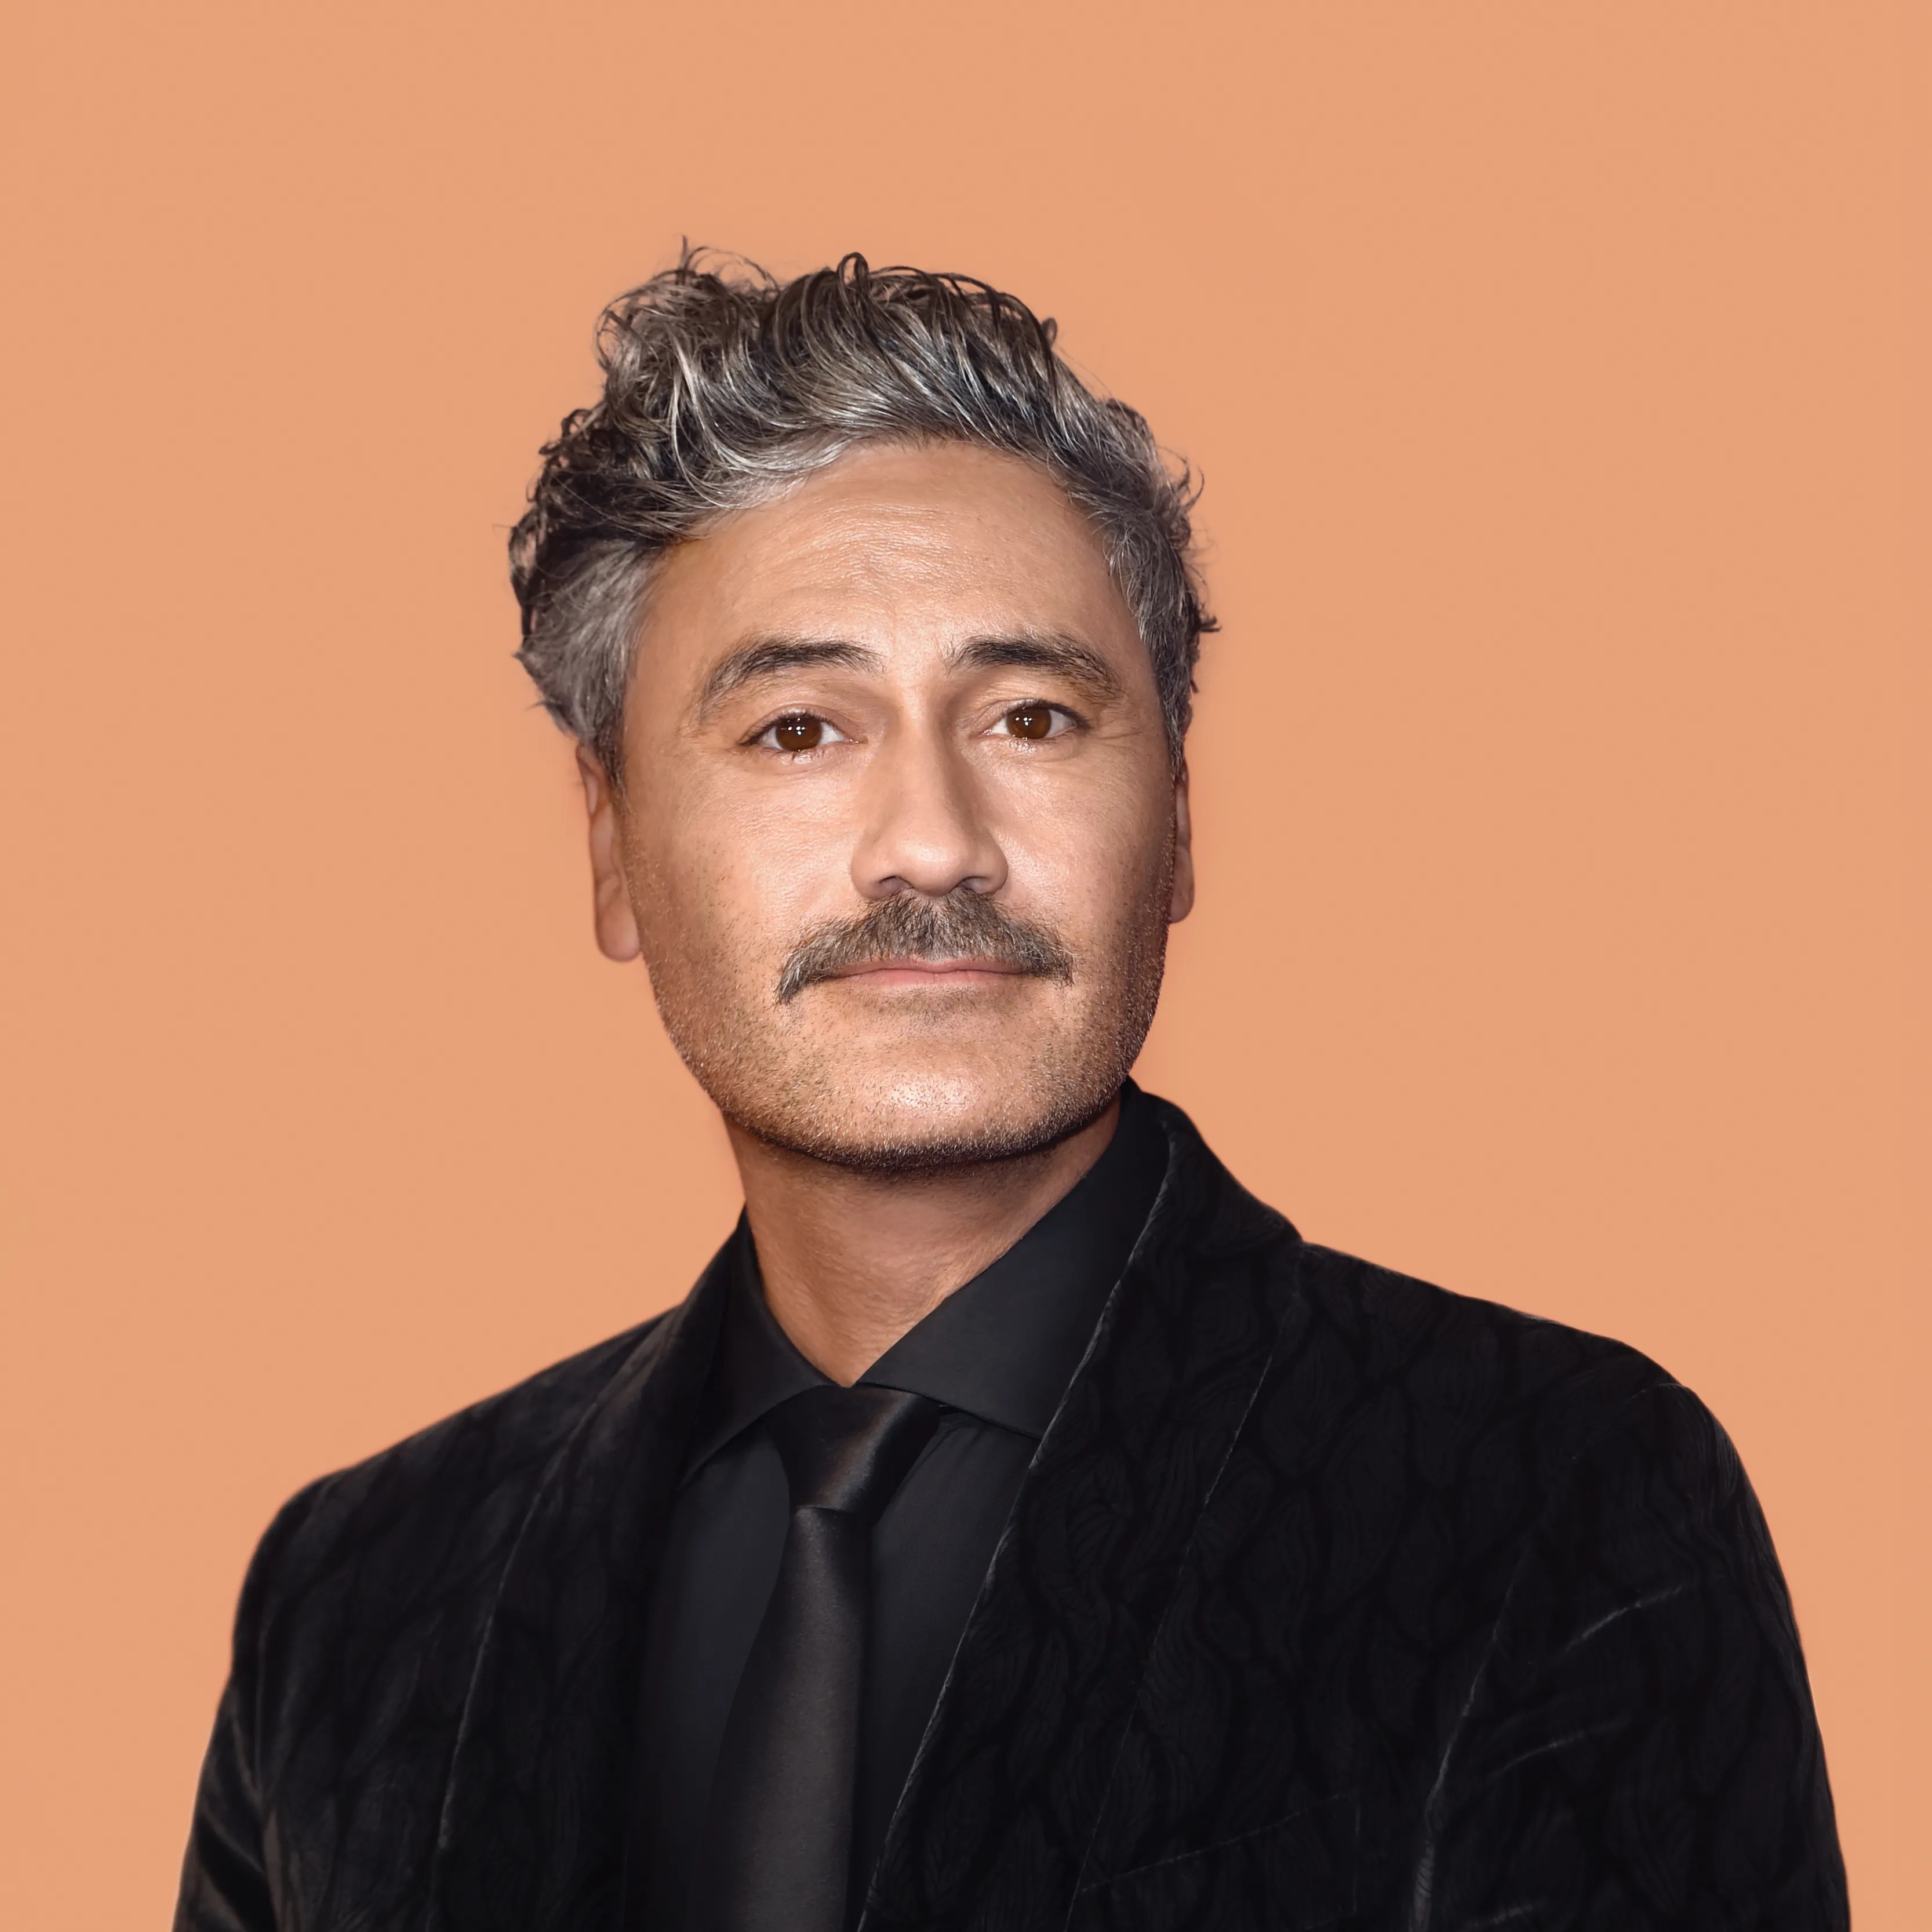 Actors Who Give A S*** To Prepare For Their Roles, Taika Waititi